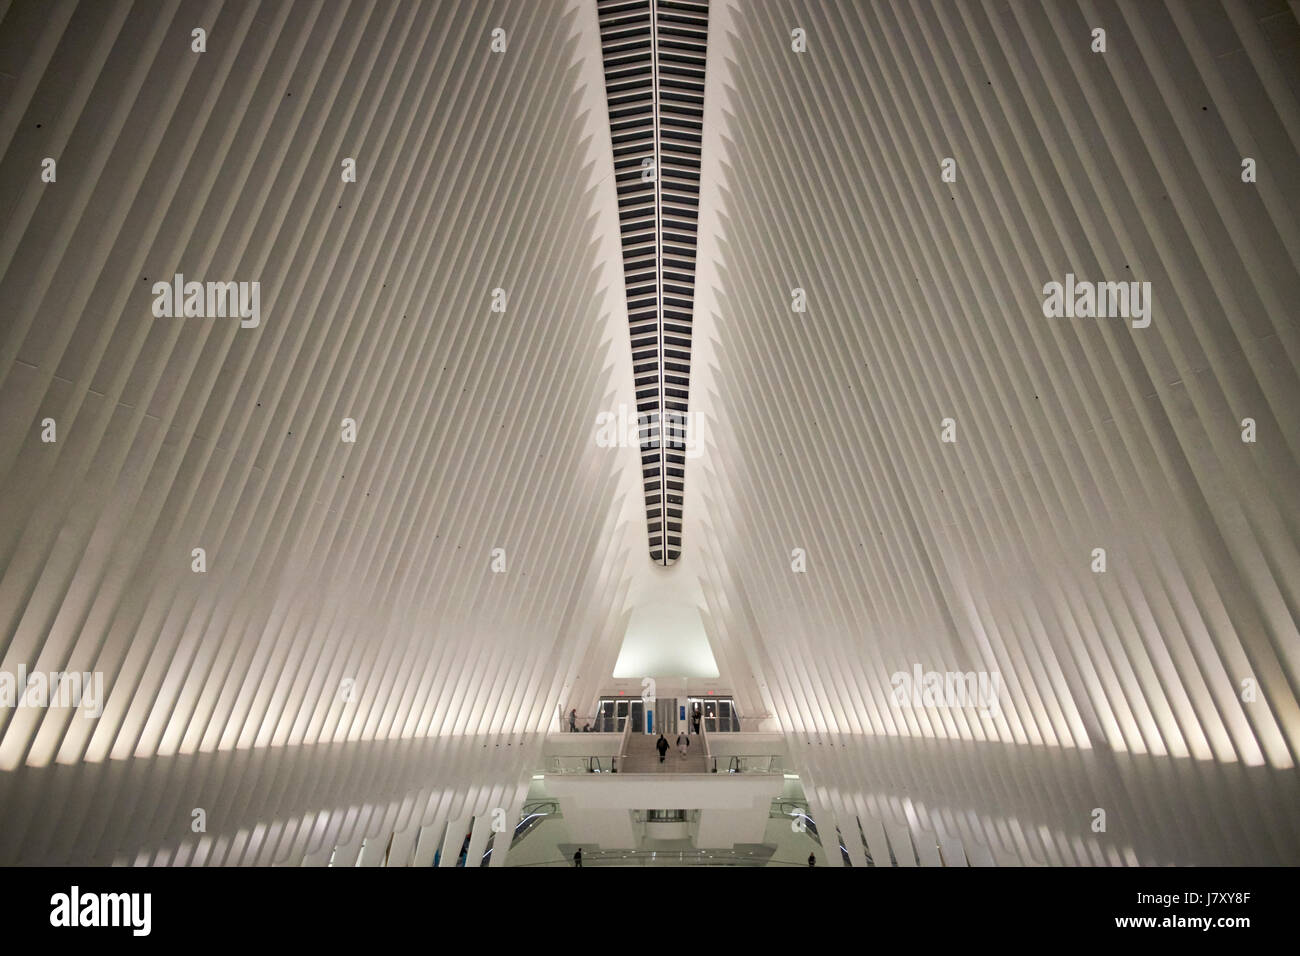 World Trade Center transportation hub and Westfield World Trade Center shopping mall known as the Oculus new york city usa Stock Photo